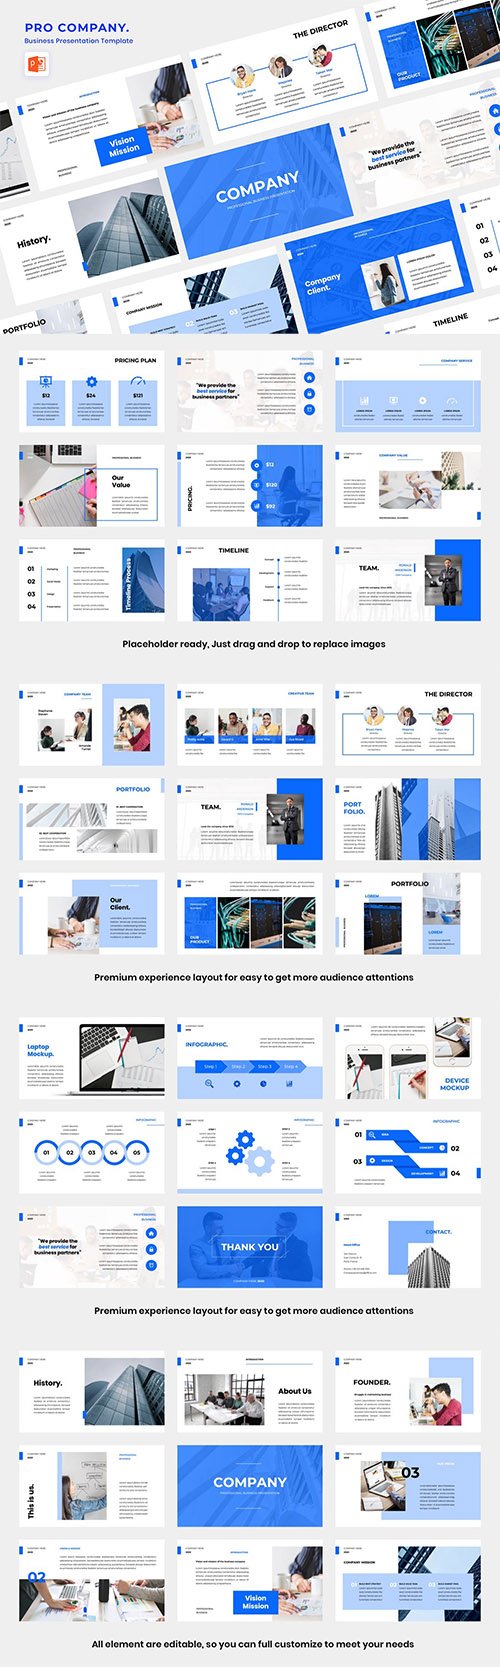 Pro Company Powerpoint, Keynote and Google Slide Template